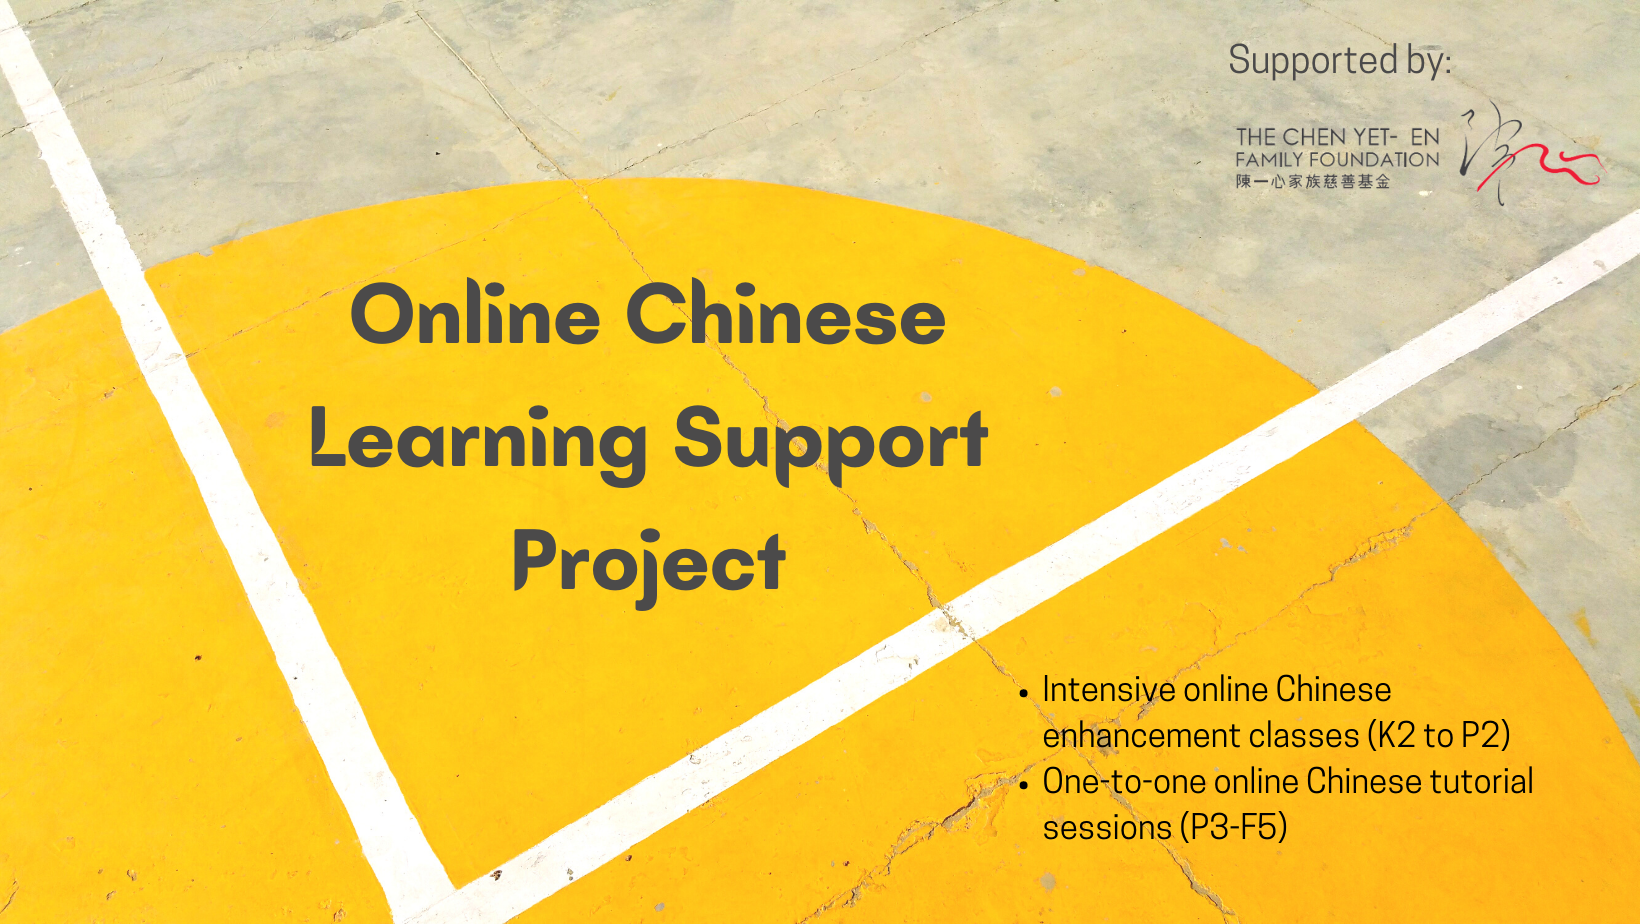 Online Chinese Learning Support Project